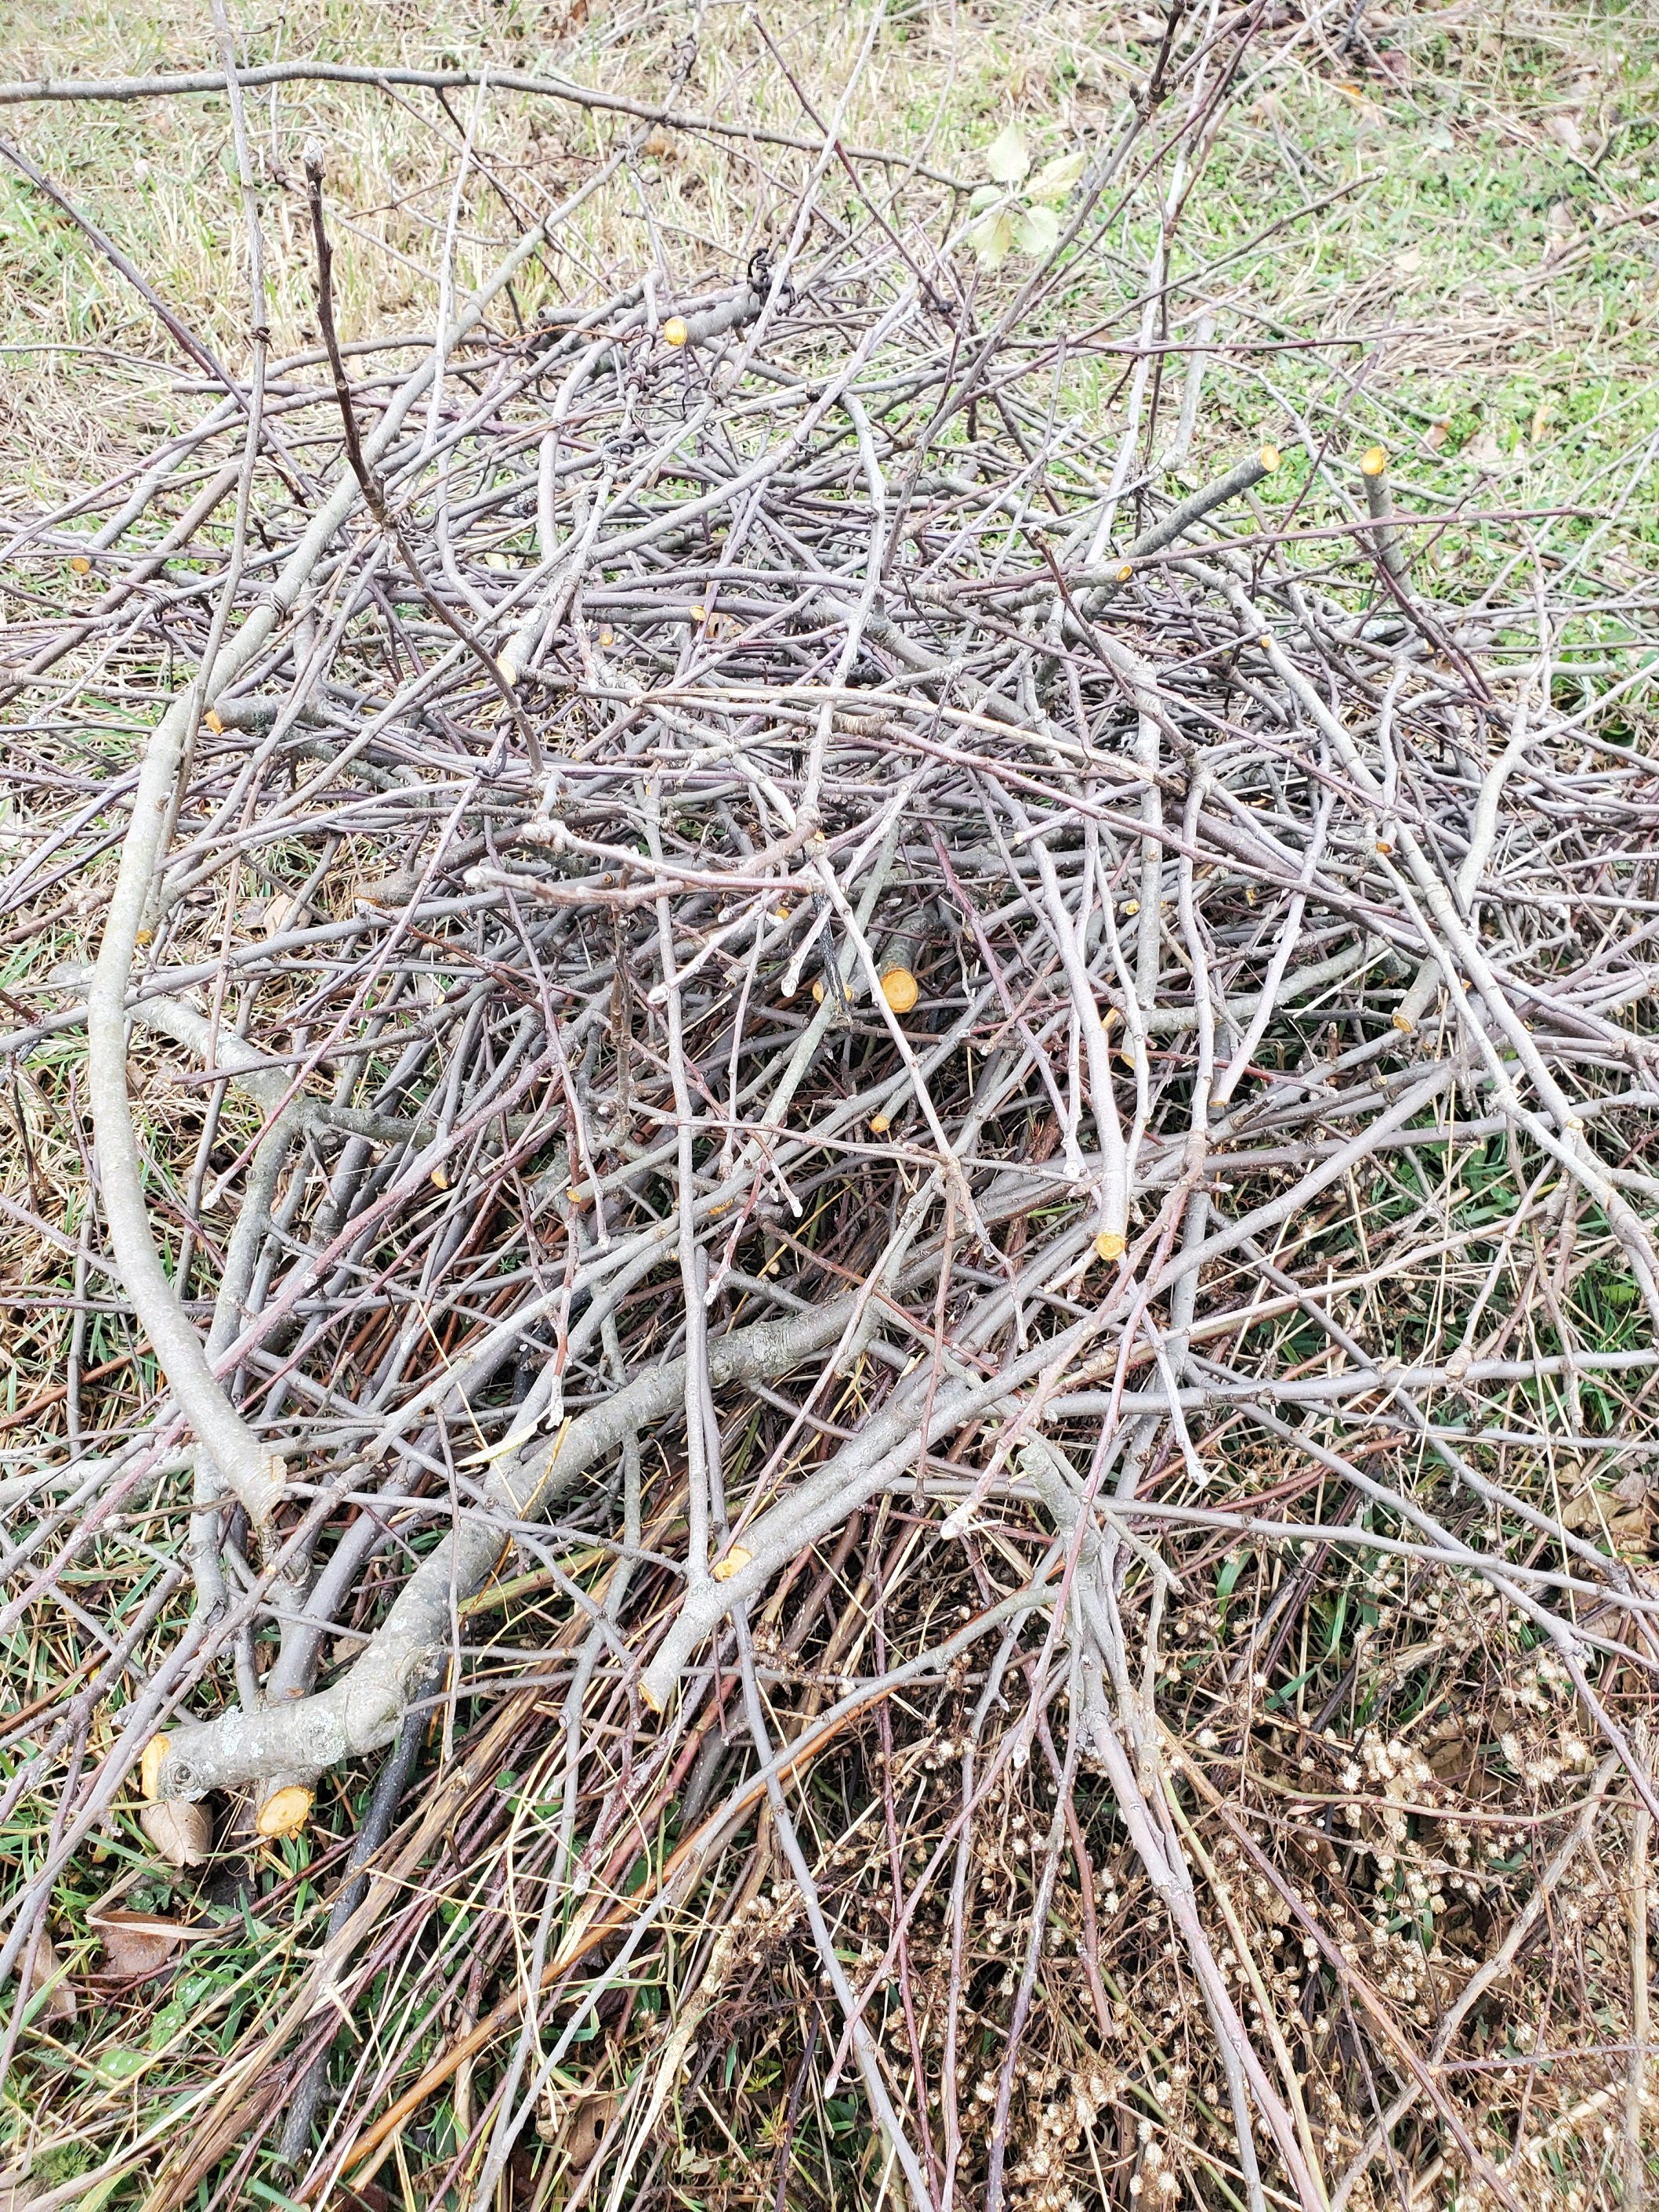 Next Happening: Isn't that just a pile of sticks?